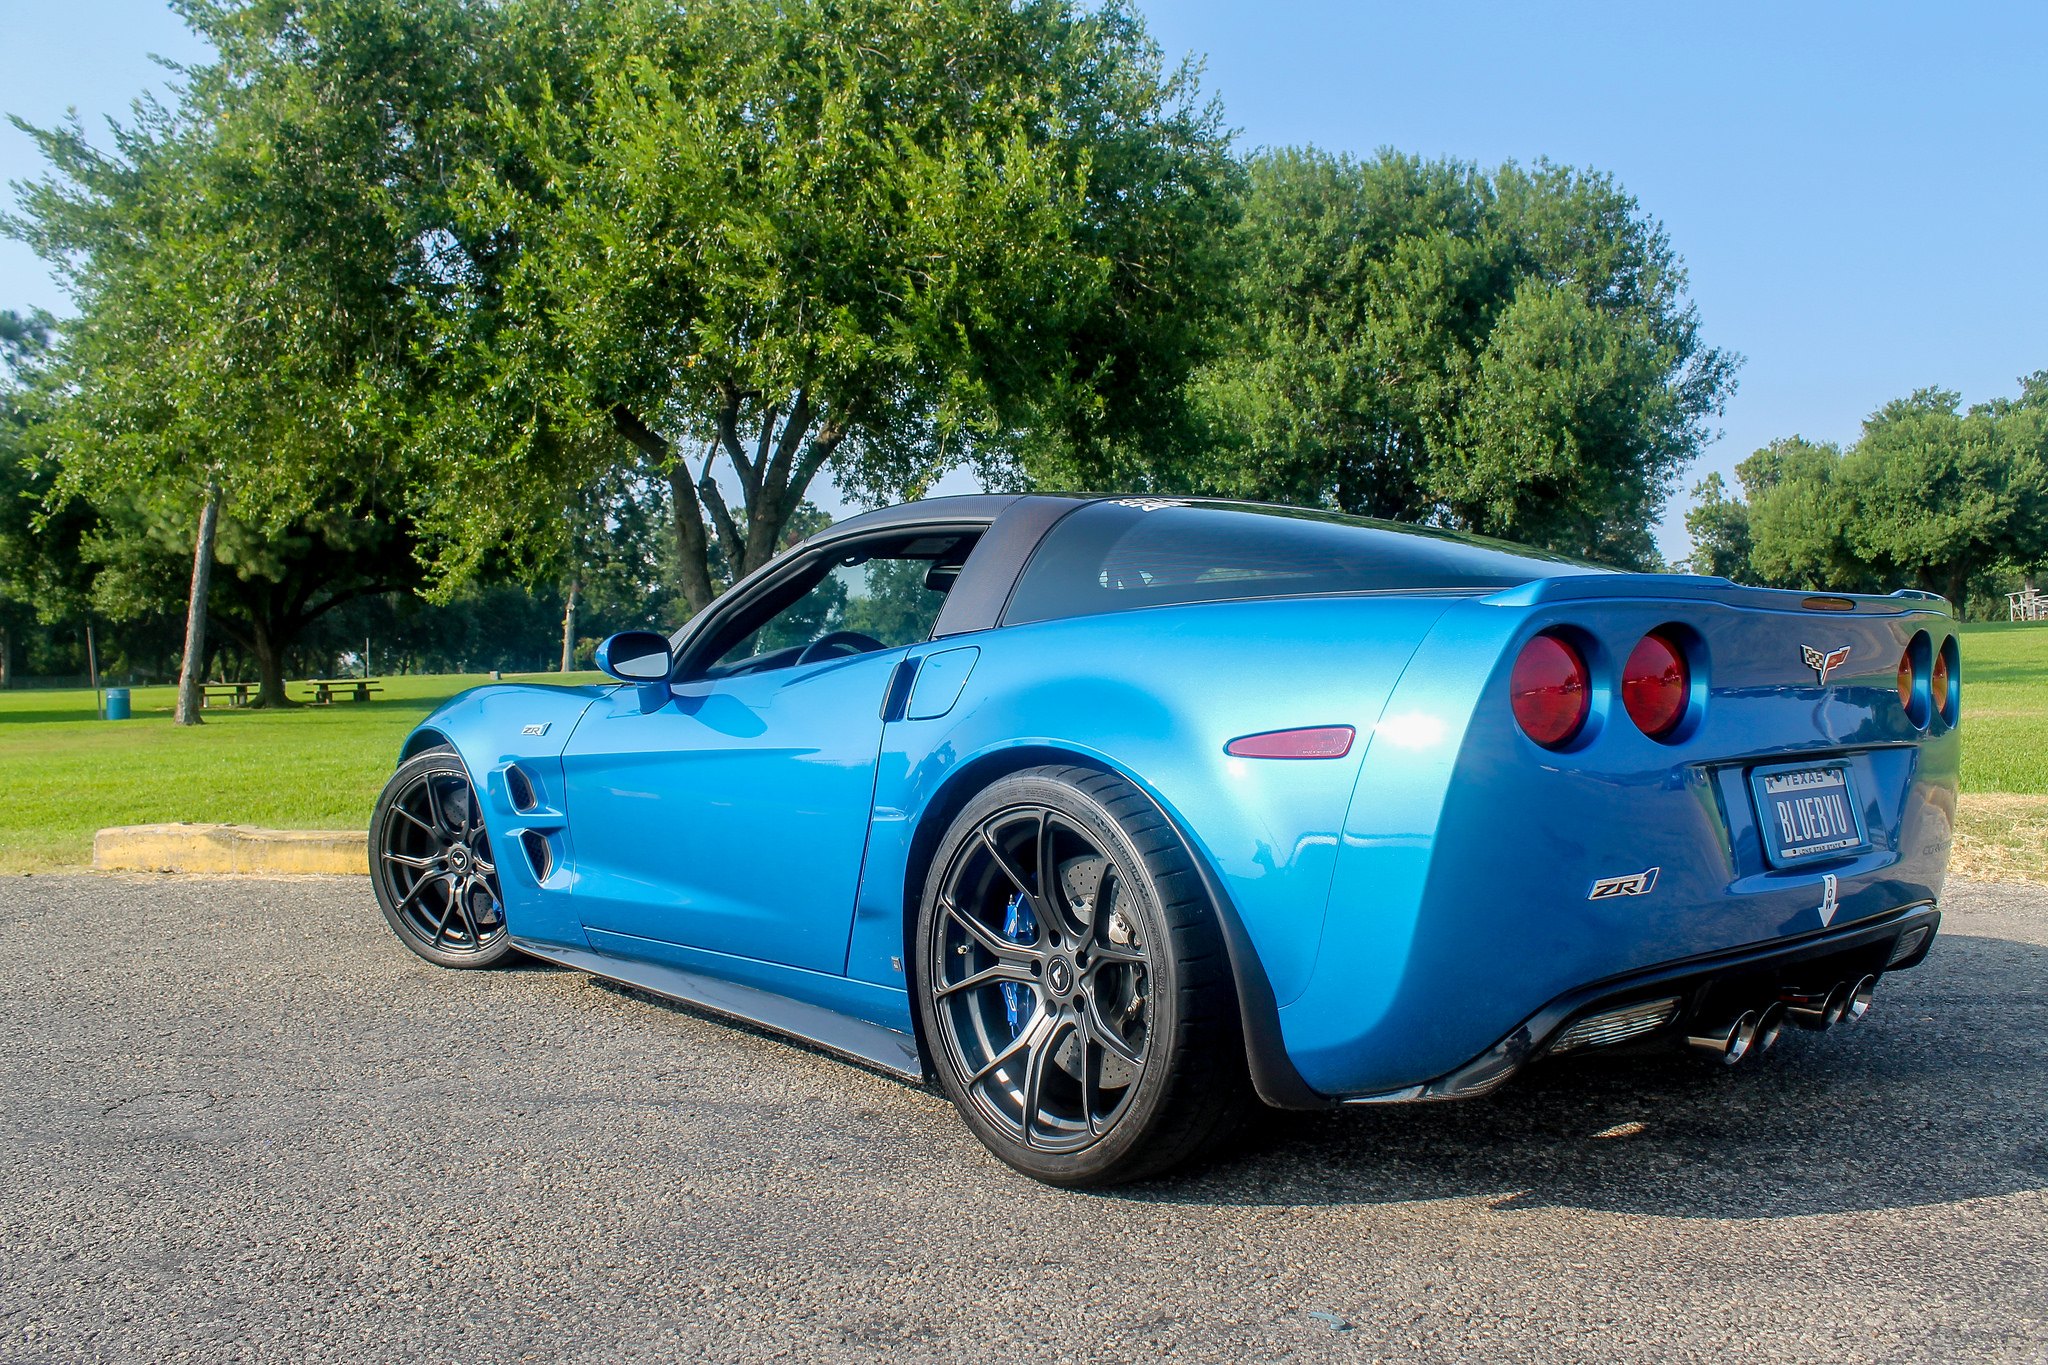 Blue Chevy Corvette with Carbon Fiber Rear Diffuser - Photo by VIBE Motorsports